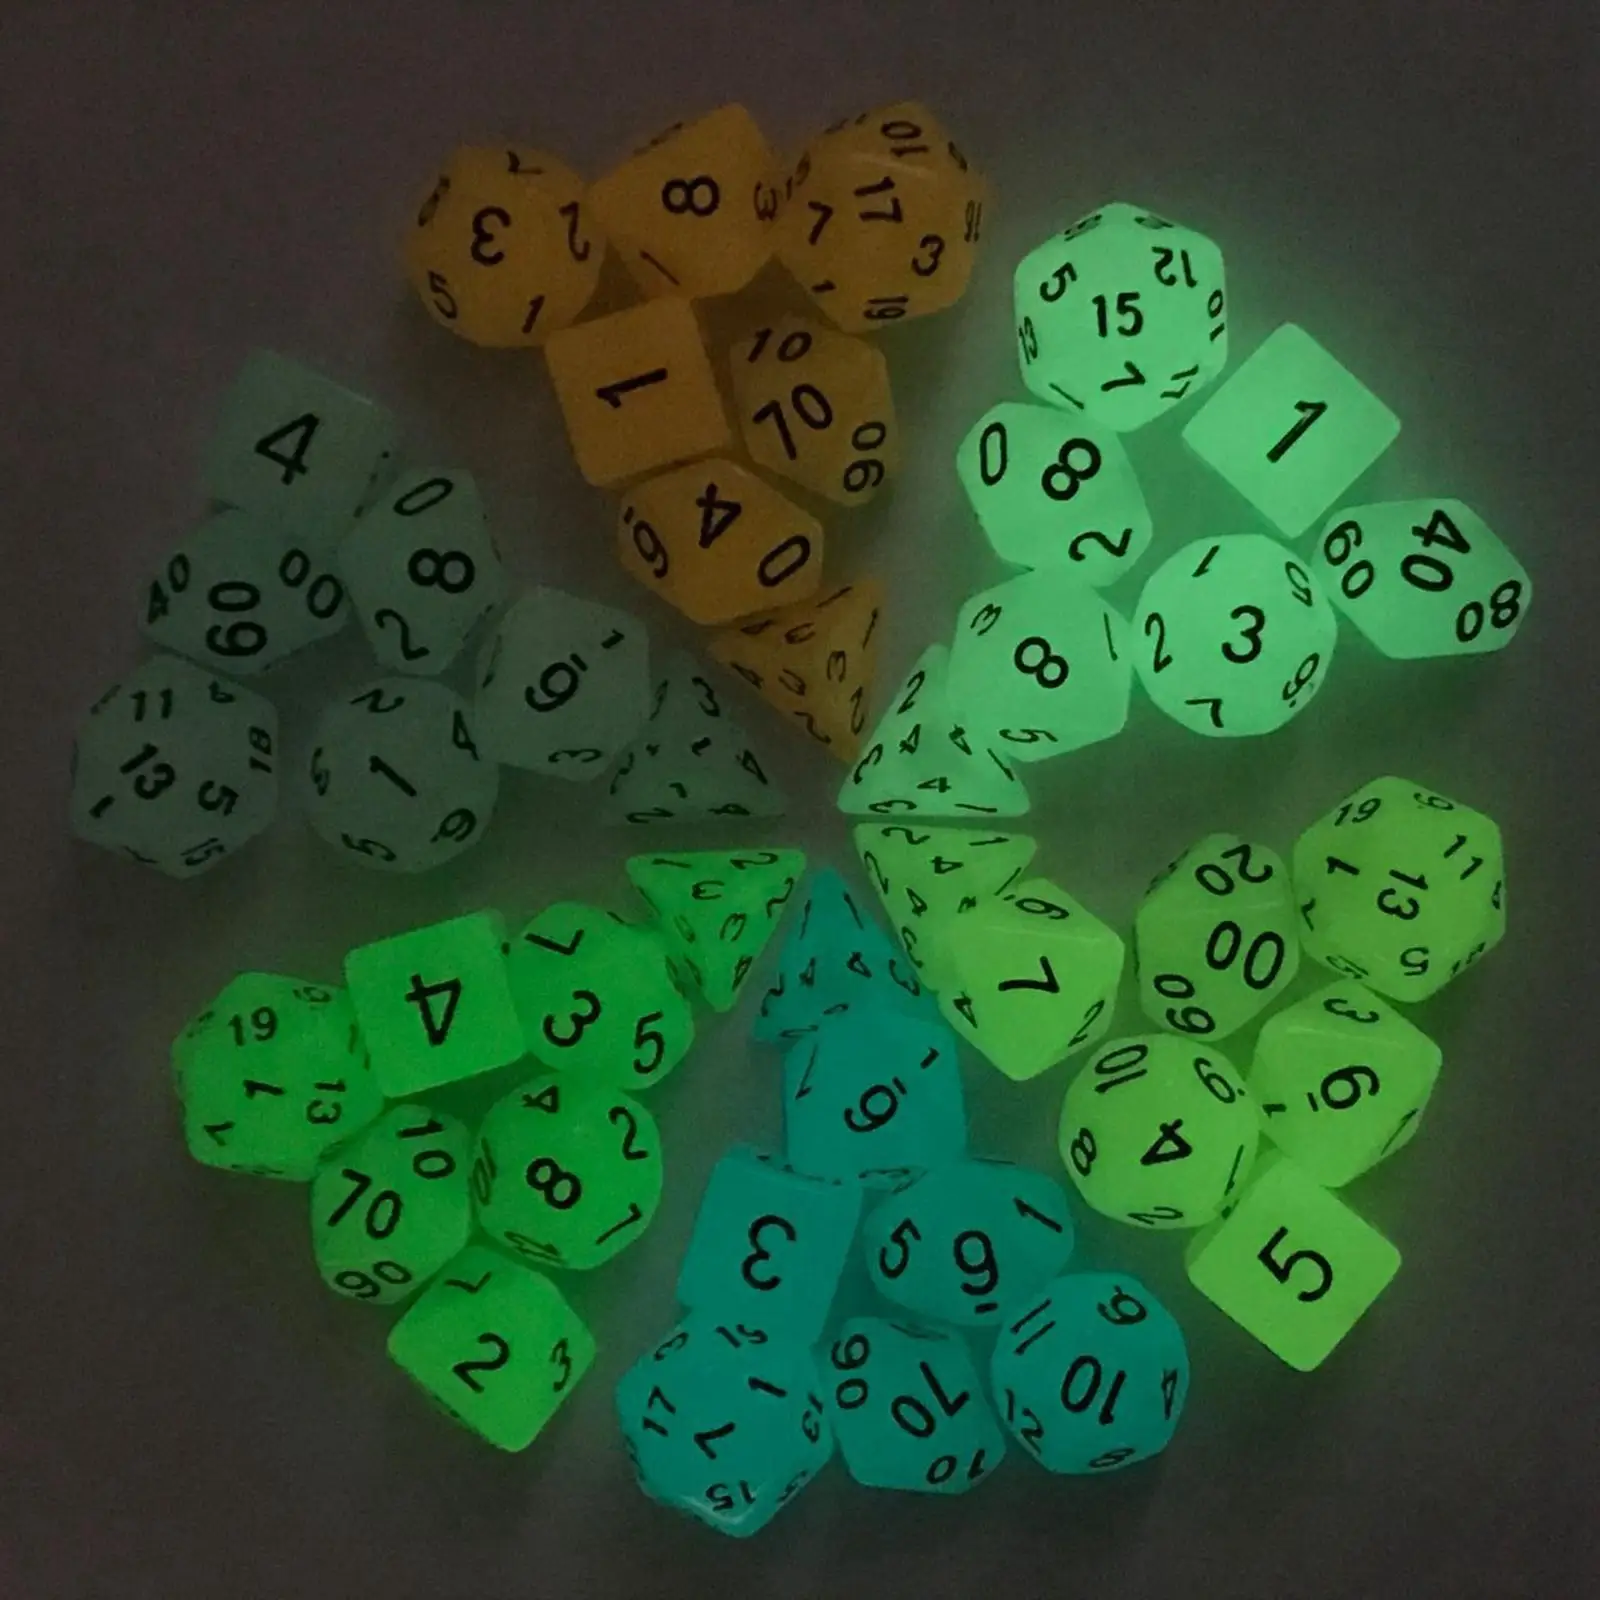 42pcs Acrylic Glowing Polyhedral Dices Set D4 D6 D8 D10 D12 D20 with Pouch Luminous Game Dice for MTG Math Teaching Role Playing